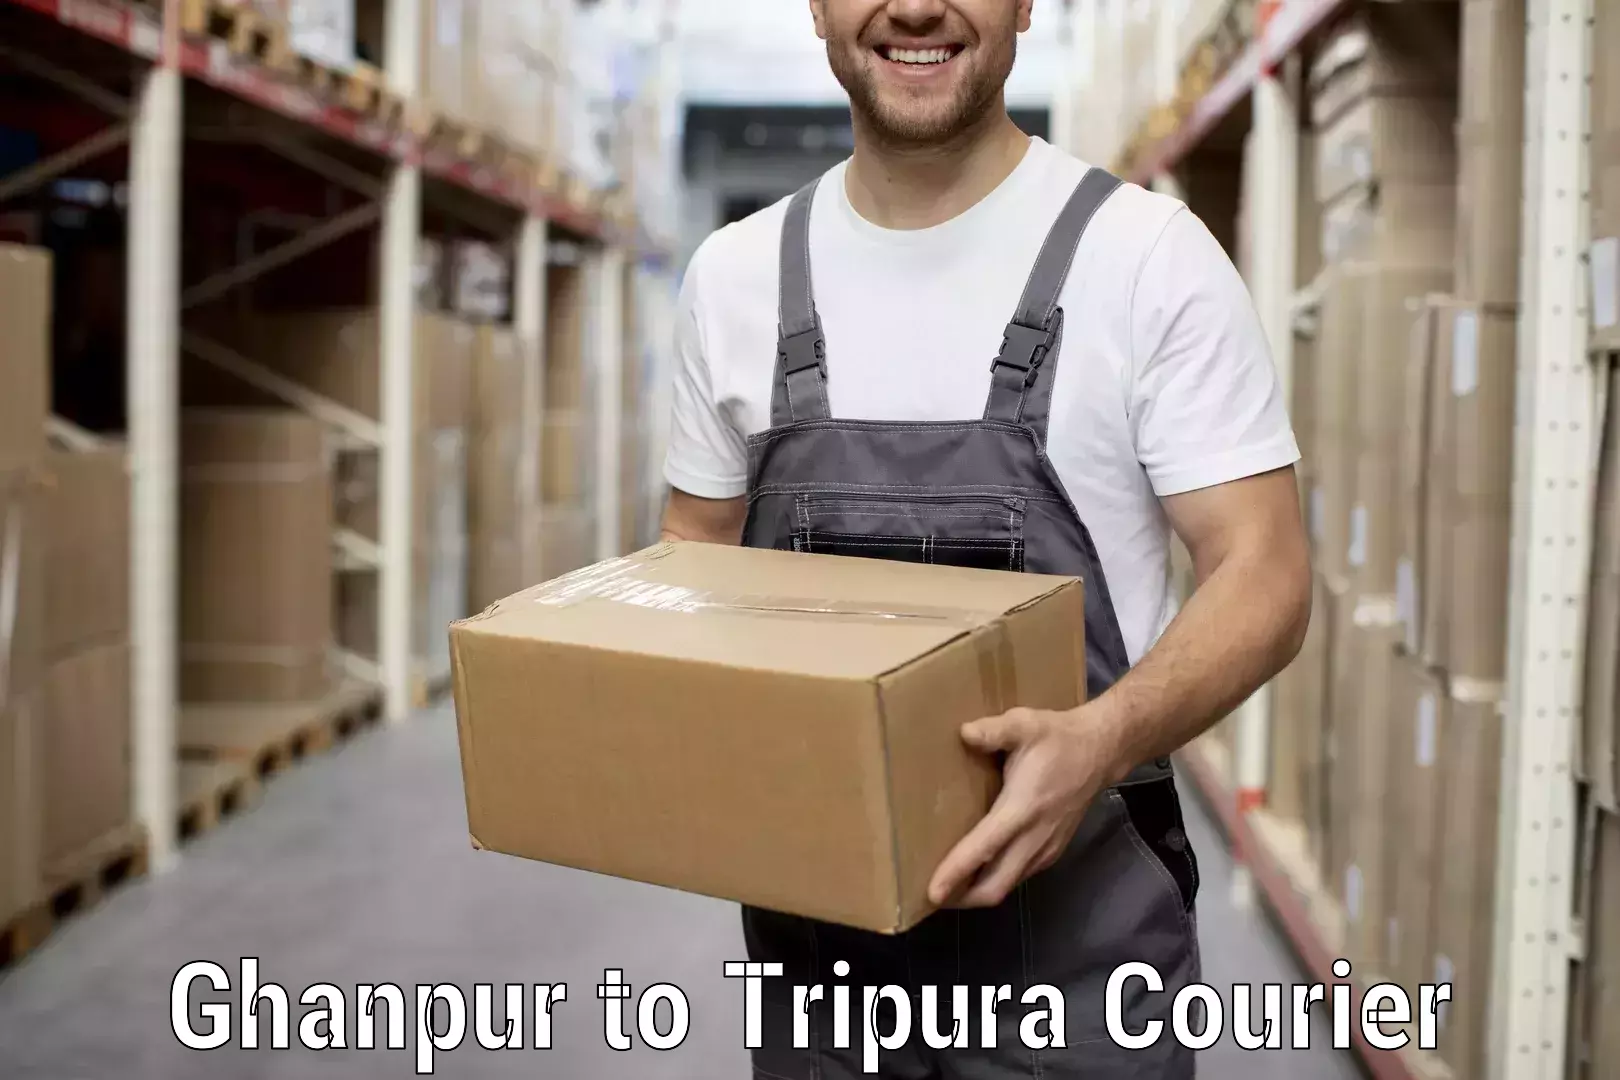 Trusted relocation experts Ghanpur to Tripura